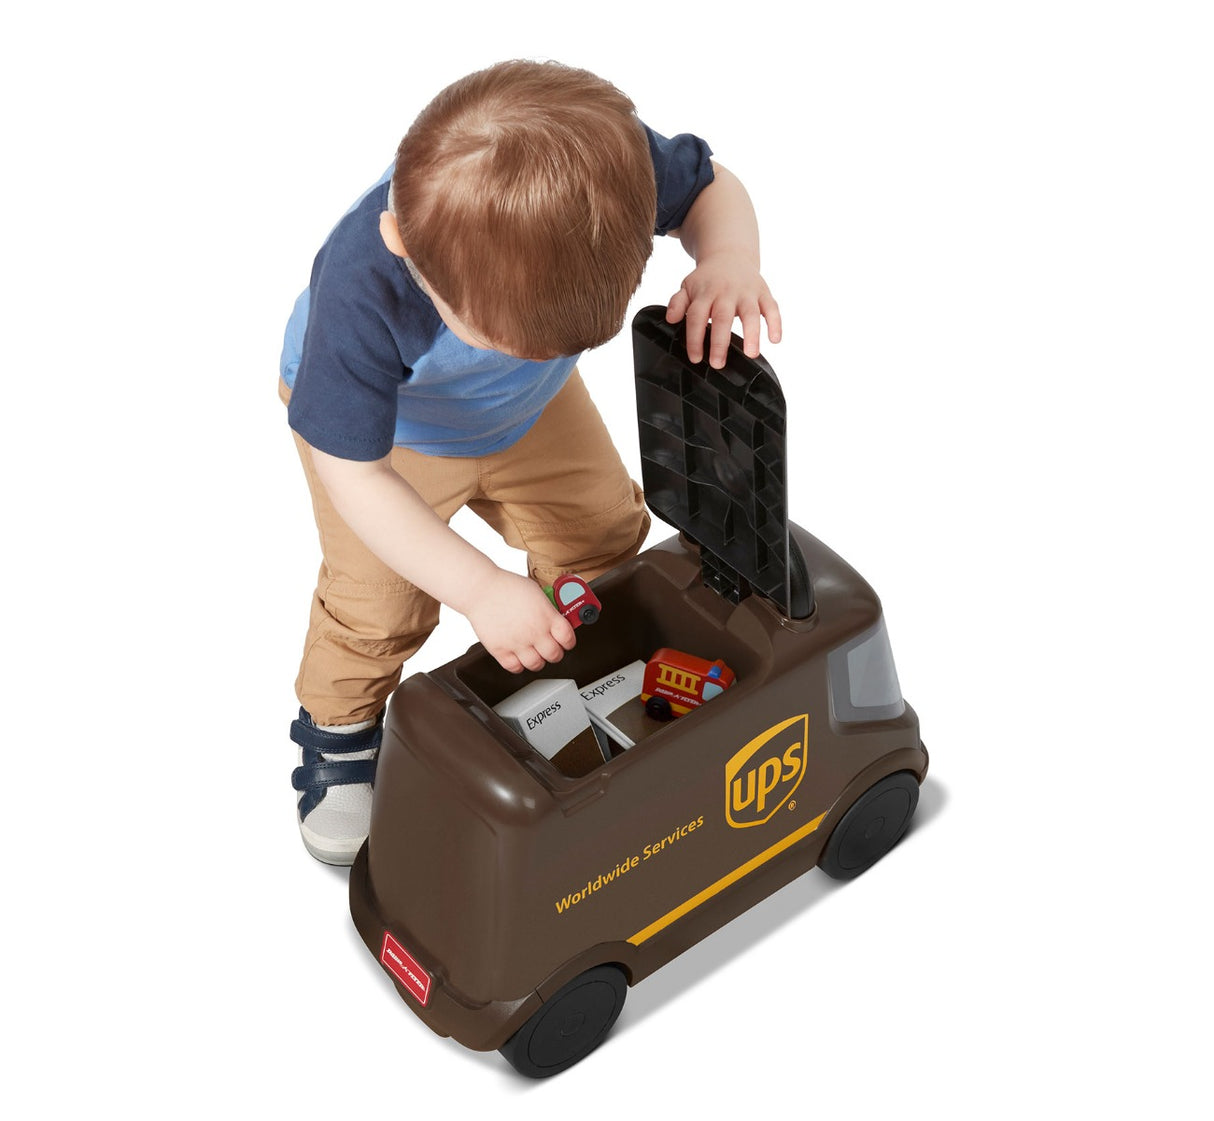 pack the included toys and boxed in the under seat storage compartment for roleplaying fun